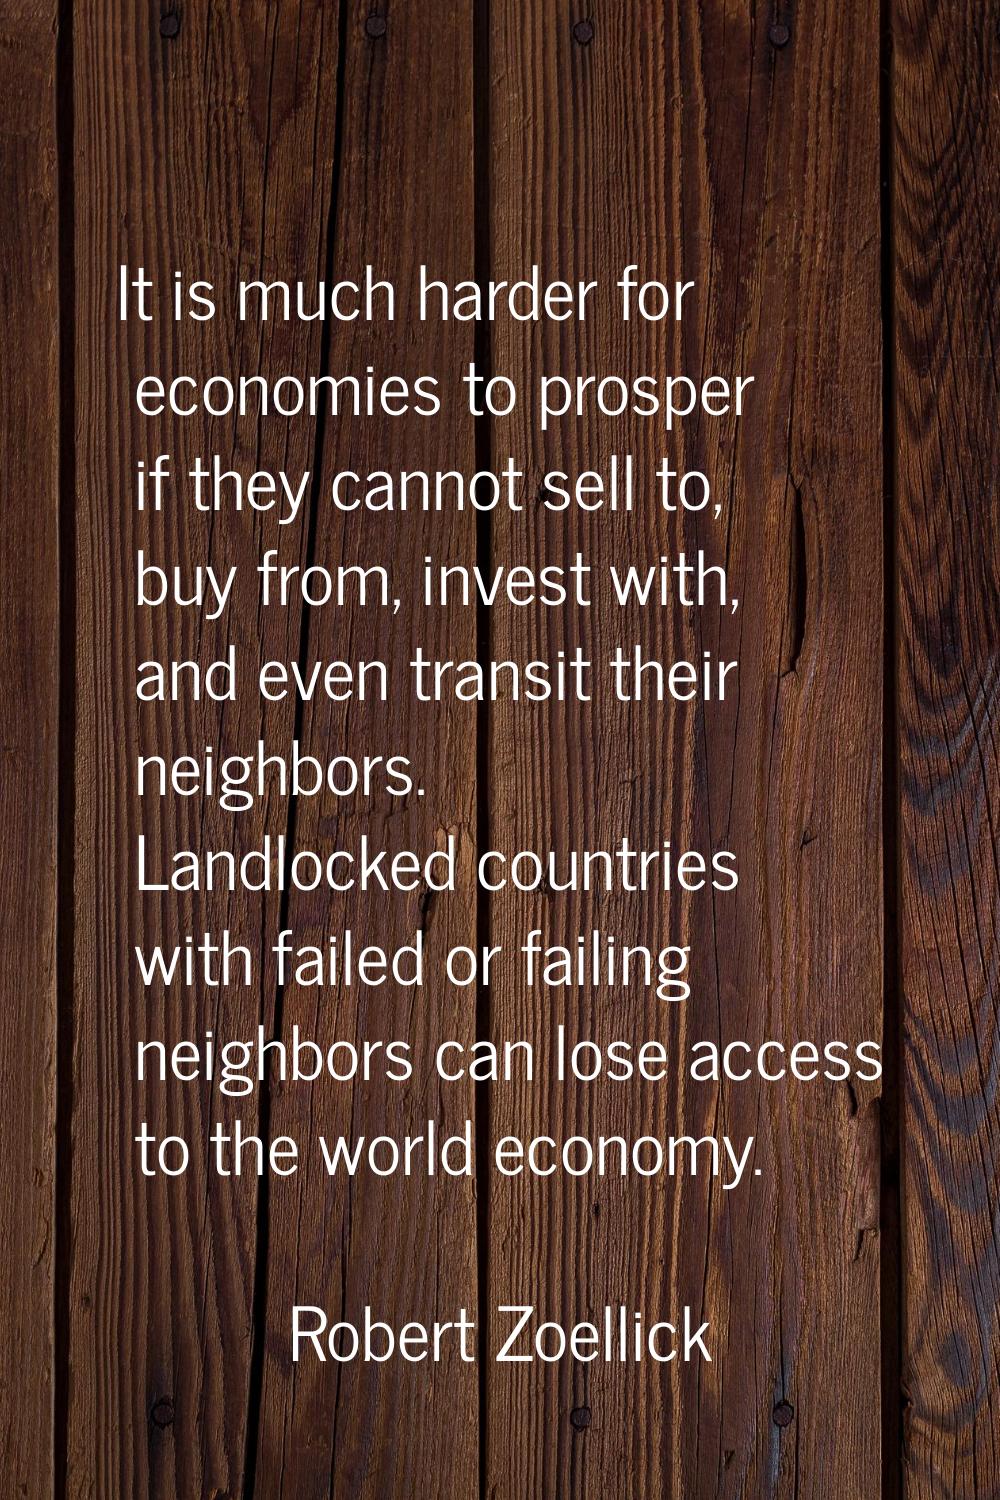 It is much harder for economies to prosper if they cannot sell to, buy from, invest with, and even 